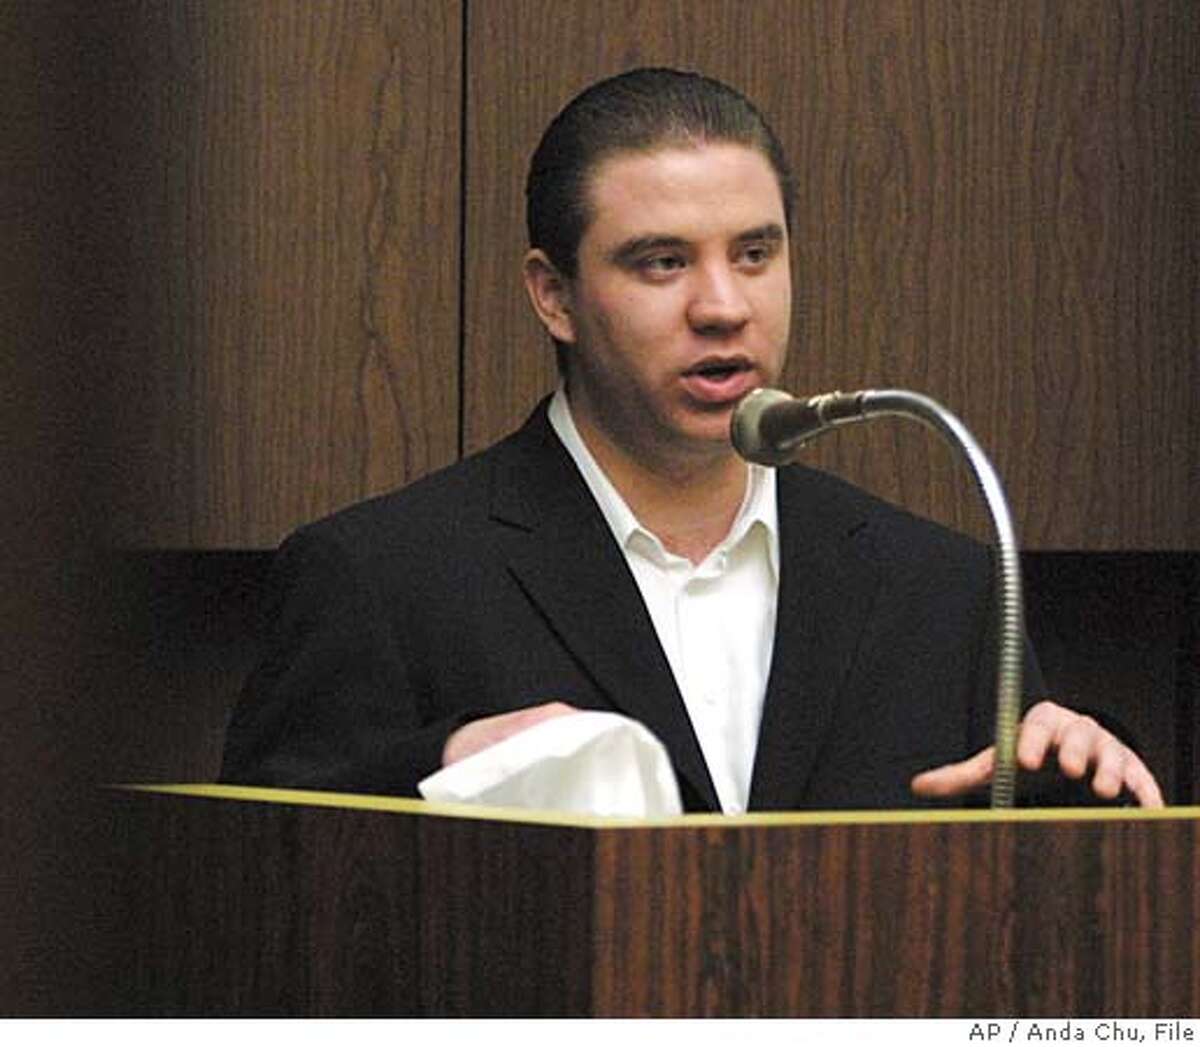 Defendant Jason Cazares answers questions from his attorney during during the trial of Cazares, 24, Michael Magidson, 23, and Jose Merel, 24, in Alameda County Superior Court, Tuesday, May 18, 2004, in Hayward, Calif. The three men are charged with killing Eddie ``Gwen'' Araujo after discovering that the 17-year-old Araujo, who they knew as a girl called ``Lida,'' was biologically male. (AP Photo/Anda Chu, Pool) ALSO RAN: 06/28/2004 Jason Cazares Ran on: 06-28-2004 Gwen Araujo ALSO Ran on: 07-31-2004 Jason Cazares testified in May during his first trial, which ended with a hung jury. ALSO RAN 08-25-2005 Jason Cazares Ran on: 08-25-2005 Jason Cazares Ran on: 08-26-2005 Jason Cazares POOL PHOTO